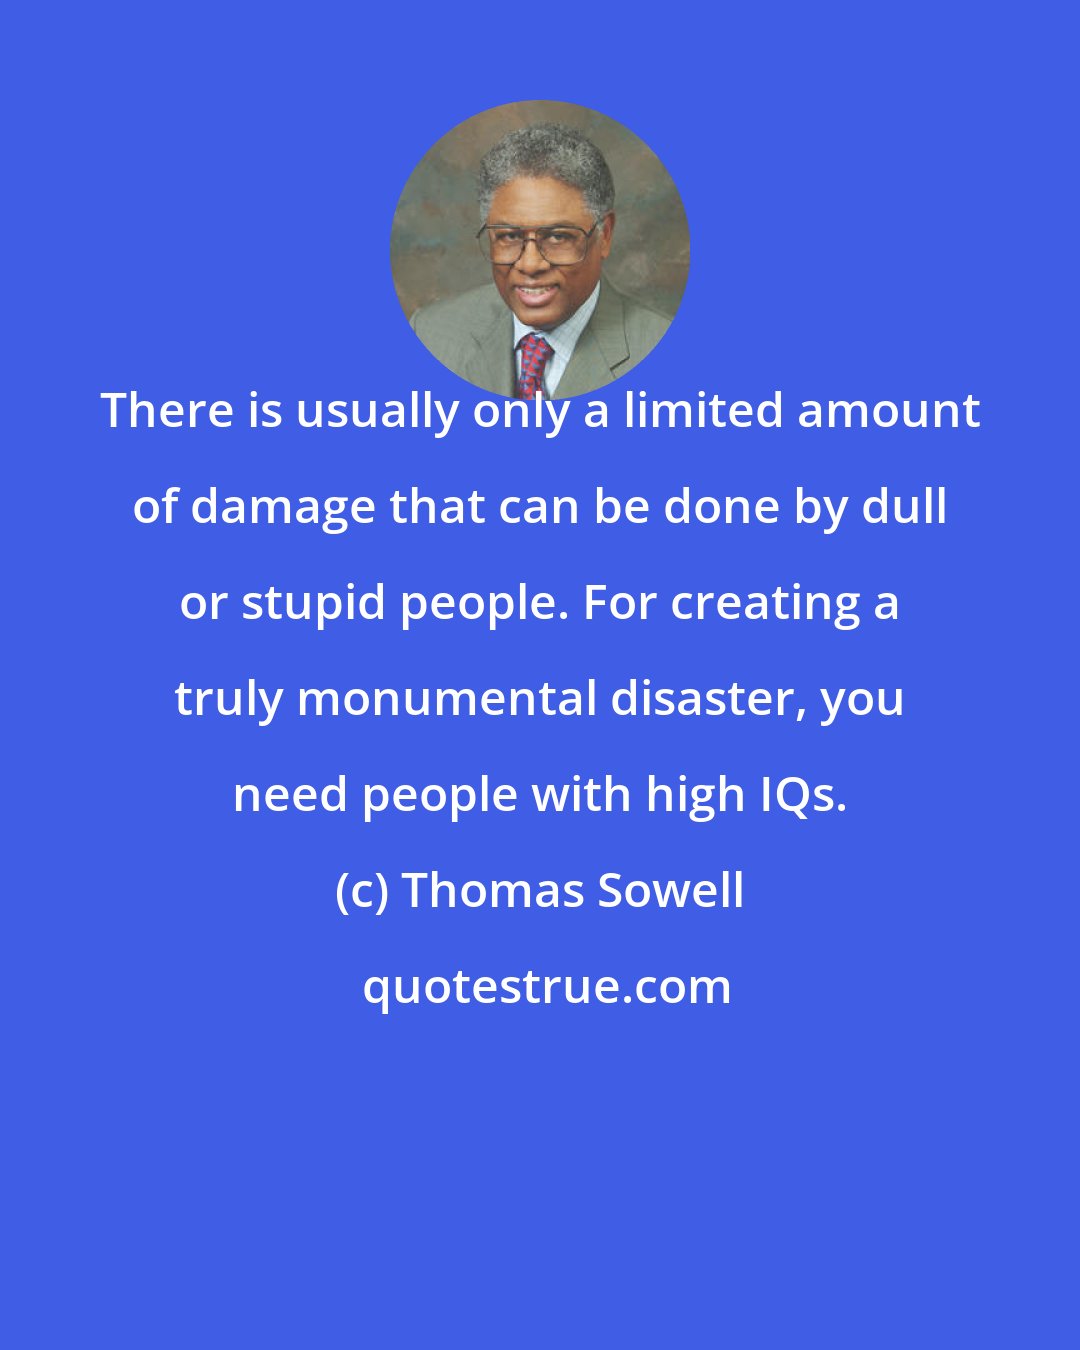 Thomas Sowell: There is usually only a limited amount of damage that can be done by dull or stupid people. For creating a truly monumental disaster, you need people with high IQs.